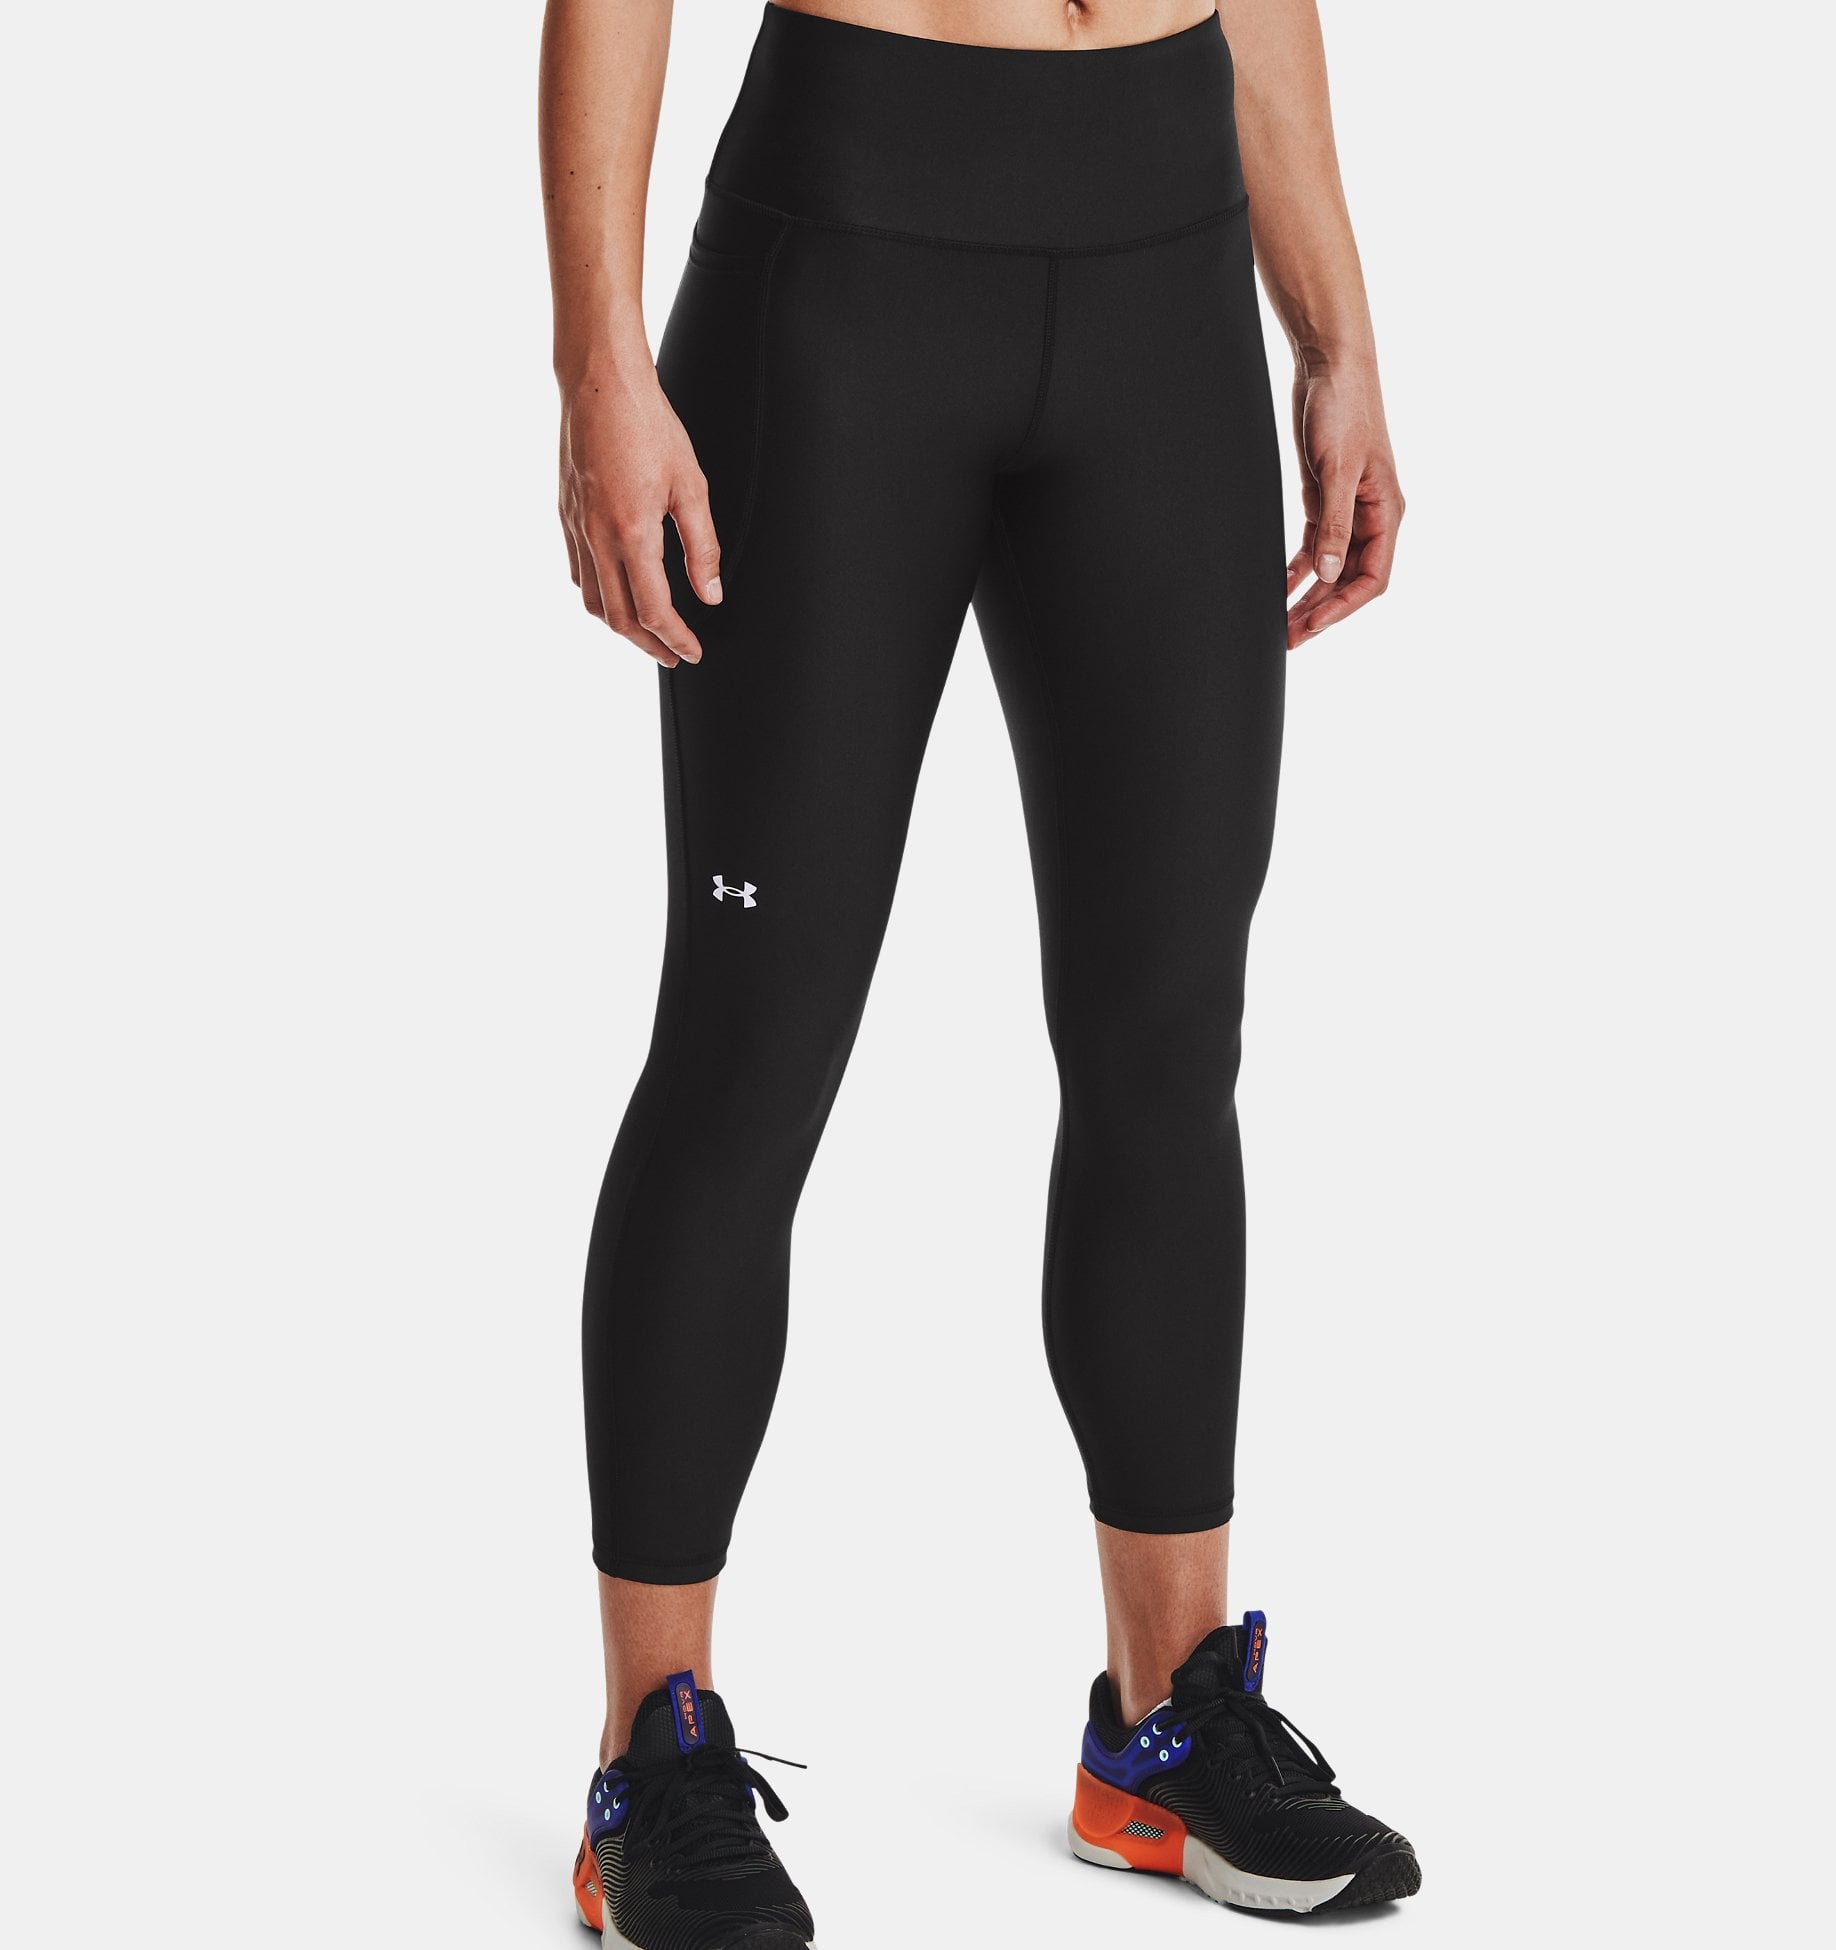 Top 5 Bioflect Compression Leggings: A Comprehensive Buying Guide 2024